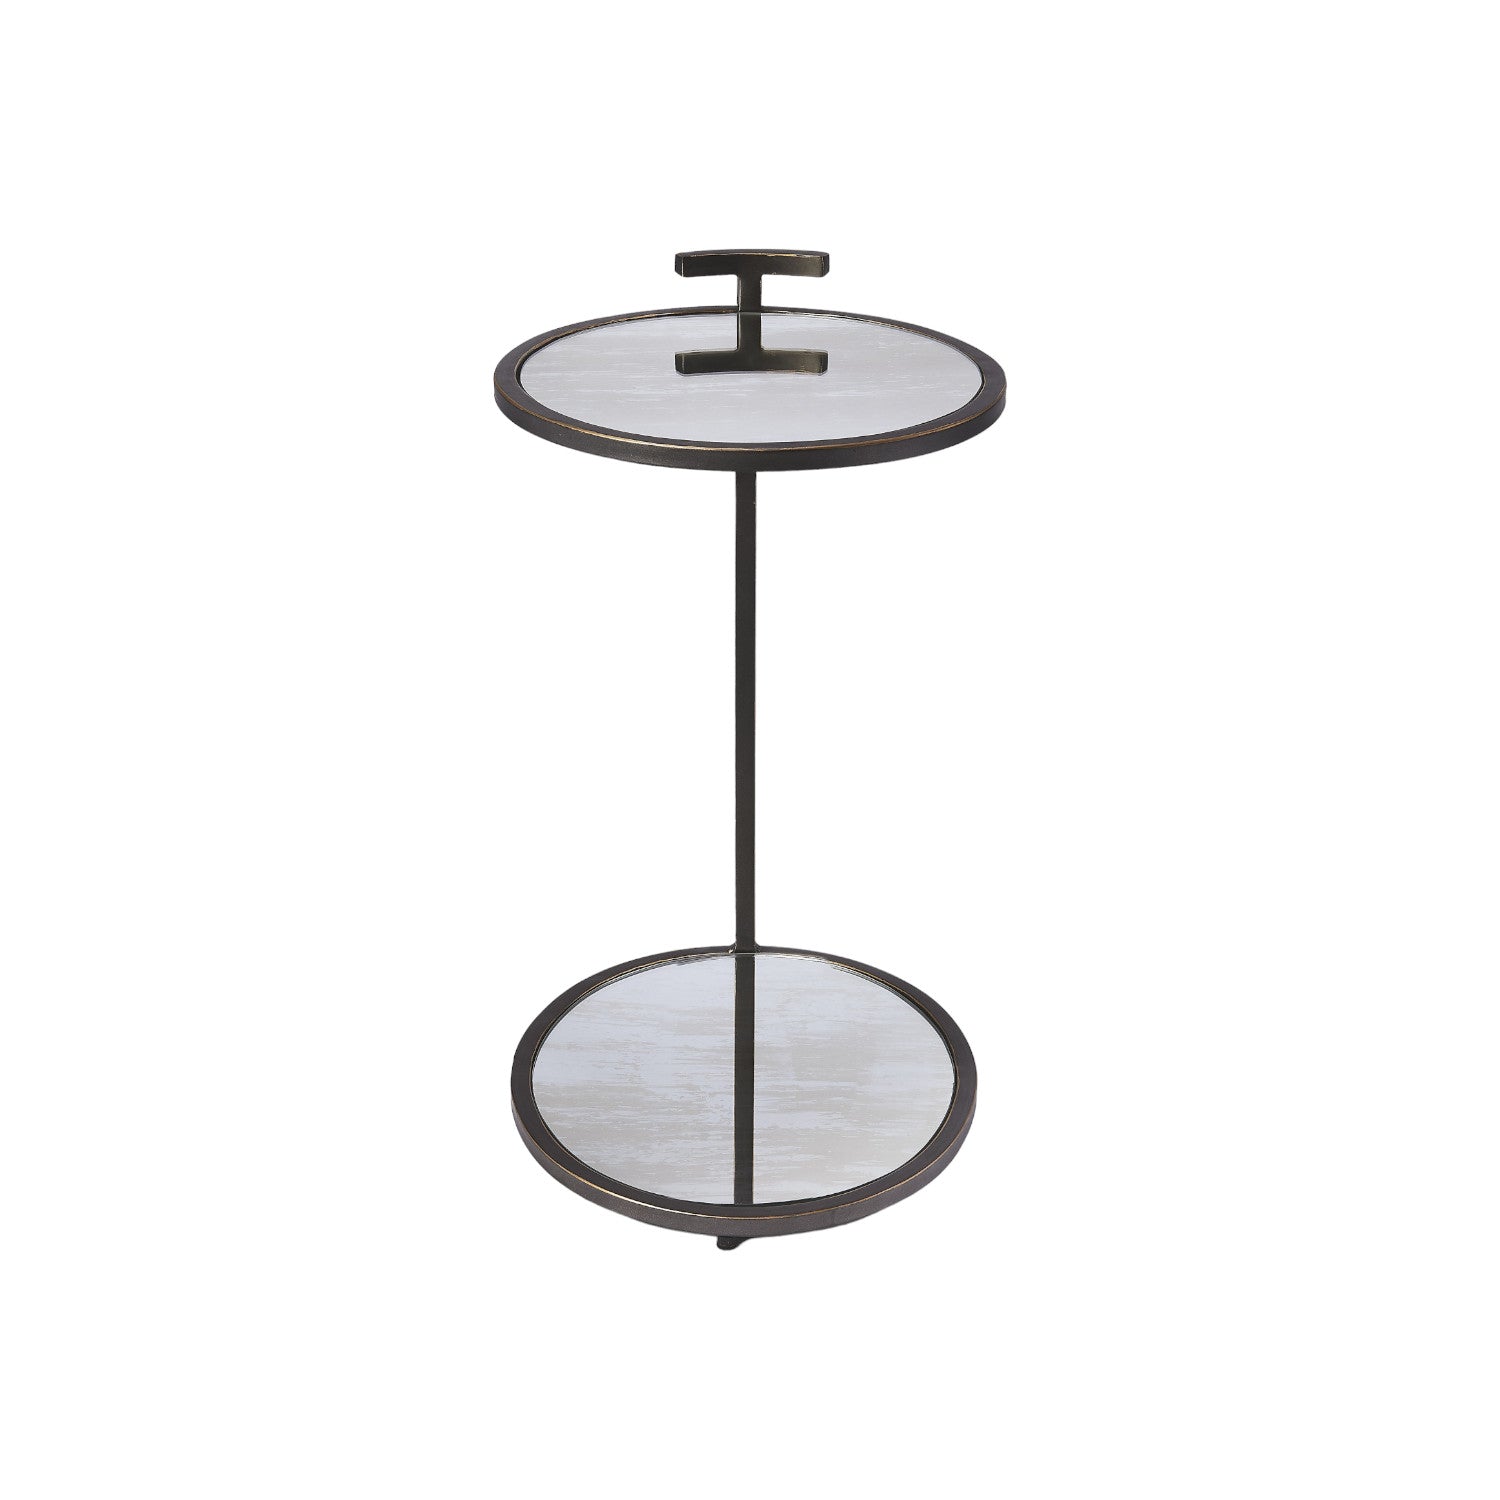 23" Black Mirrored Oval End Table With Shelf